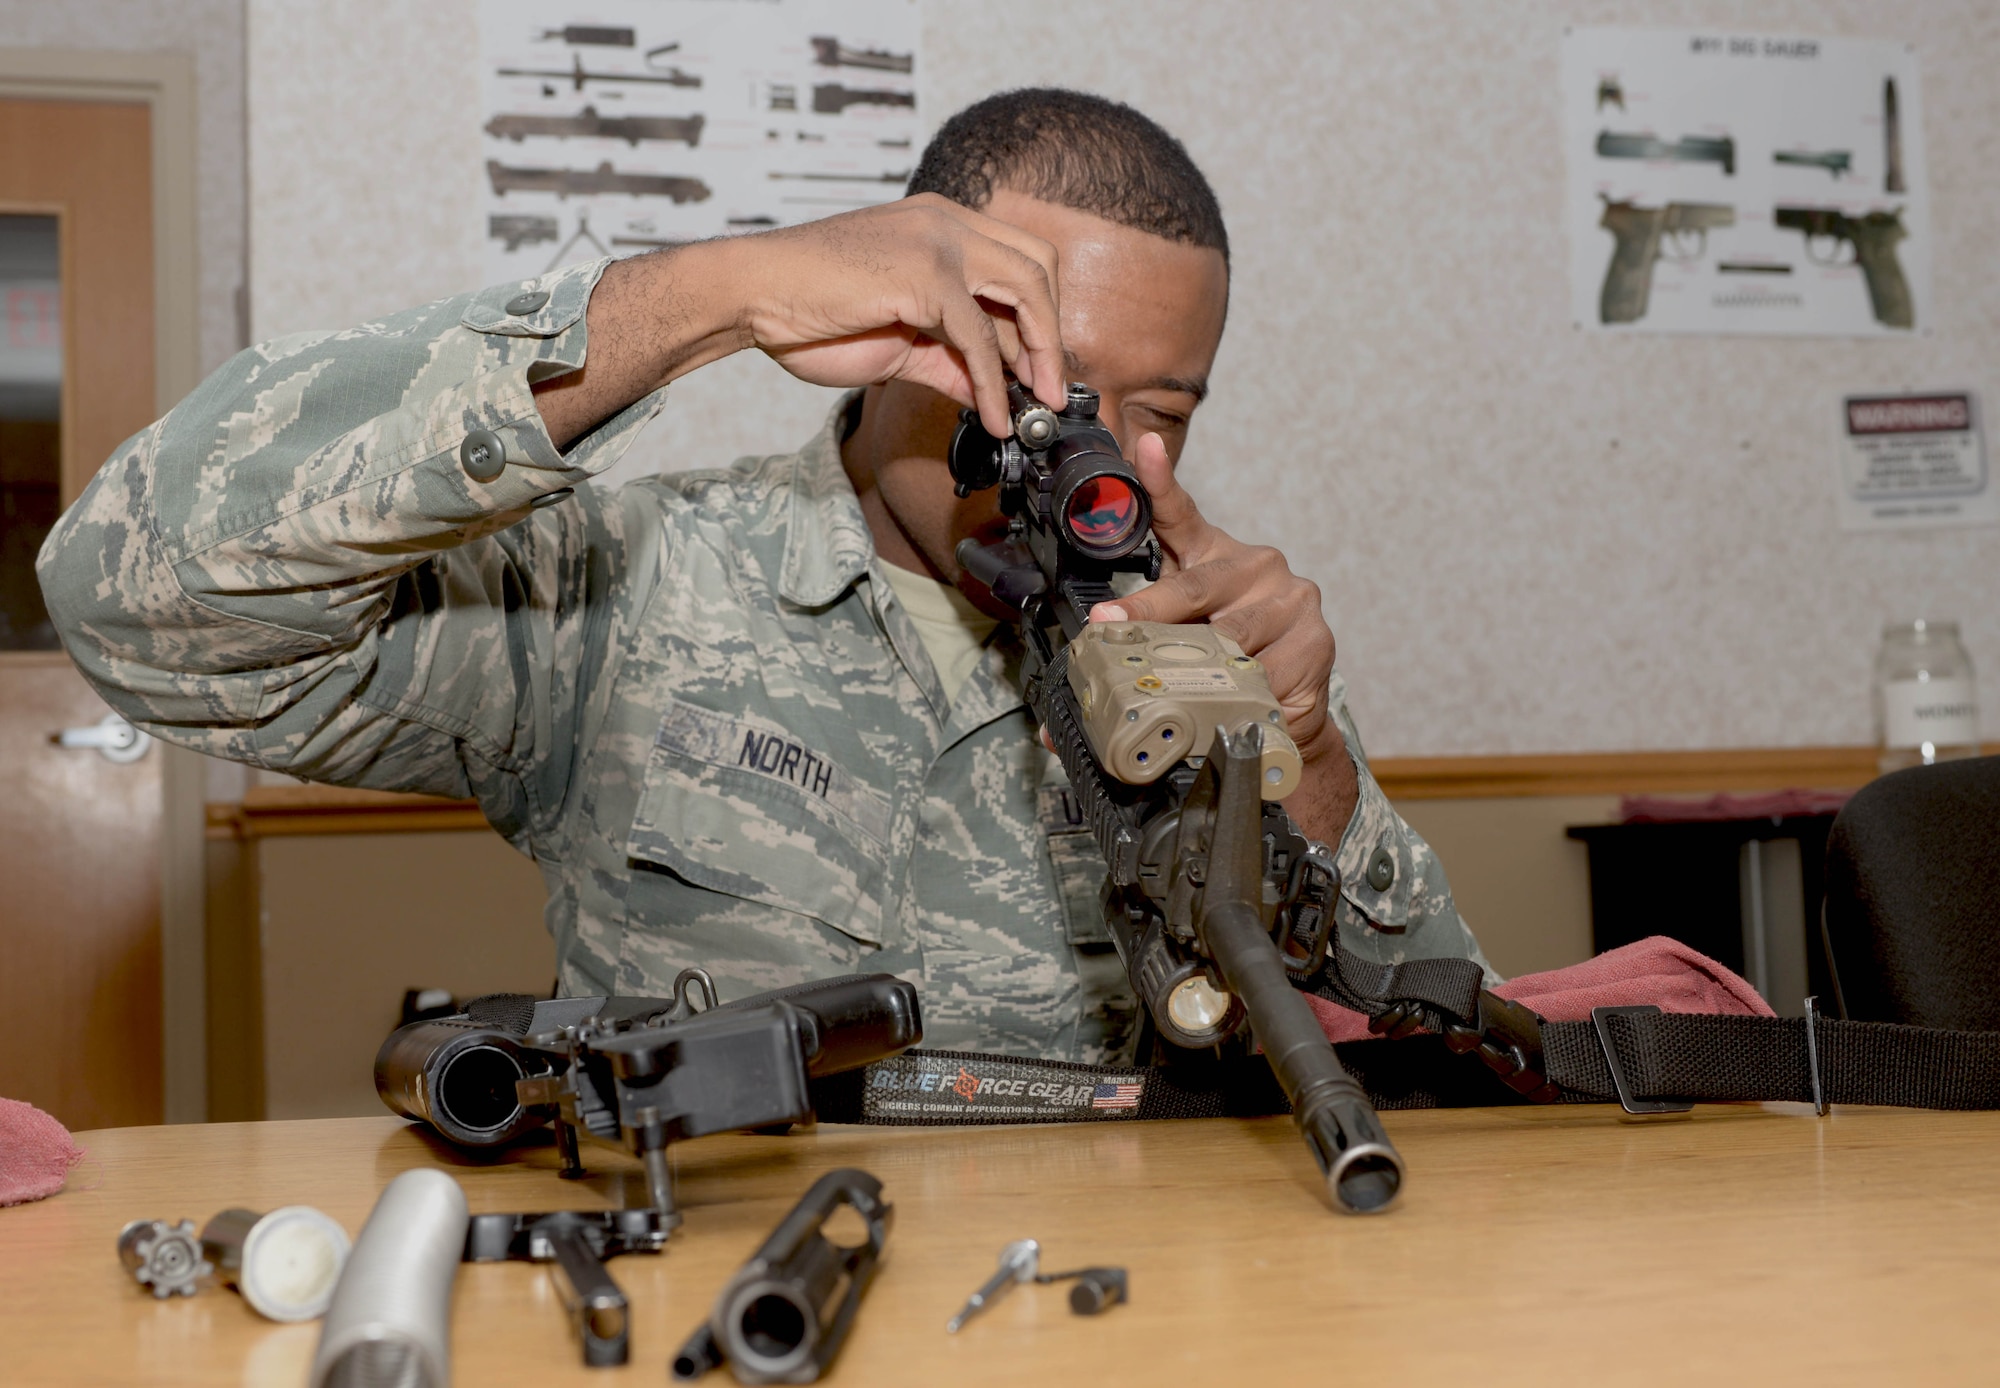 Senior Airman Tijon North, a response force leader assigned to the 28th Security Forces Squadron, assembles an M4 carbine rifle during a training session at Ellsworth Air Force Base, S.D., Oct. 6, 2016. The mission of Combat Arms Training and Maintenance is to insure that anyone who needs to arm with lethal weapons are qualified and know the operations and proper procedures of the equipment they are using. (U.S. Air Force photo by Airman 1st Class Donald C. Knechtel)